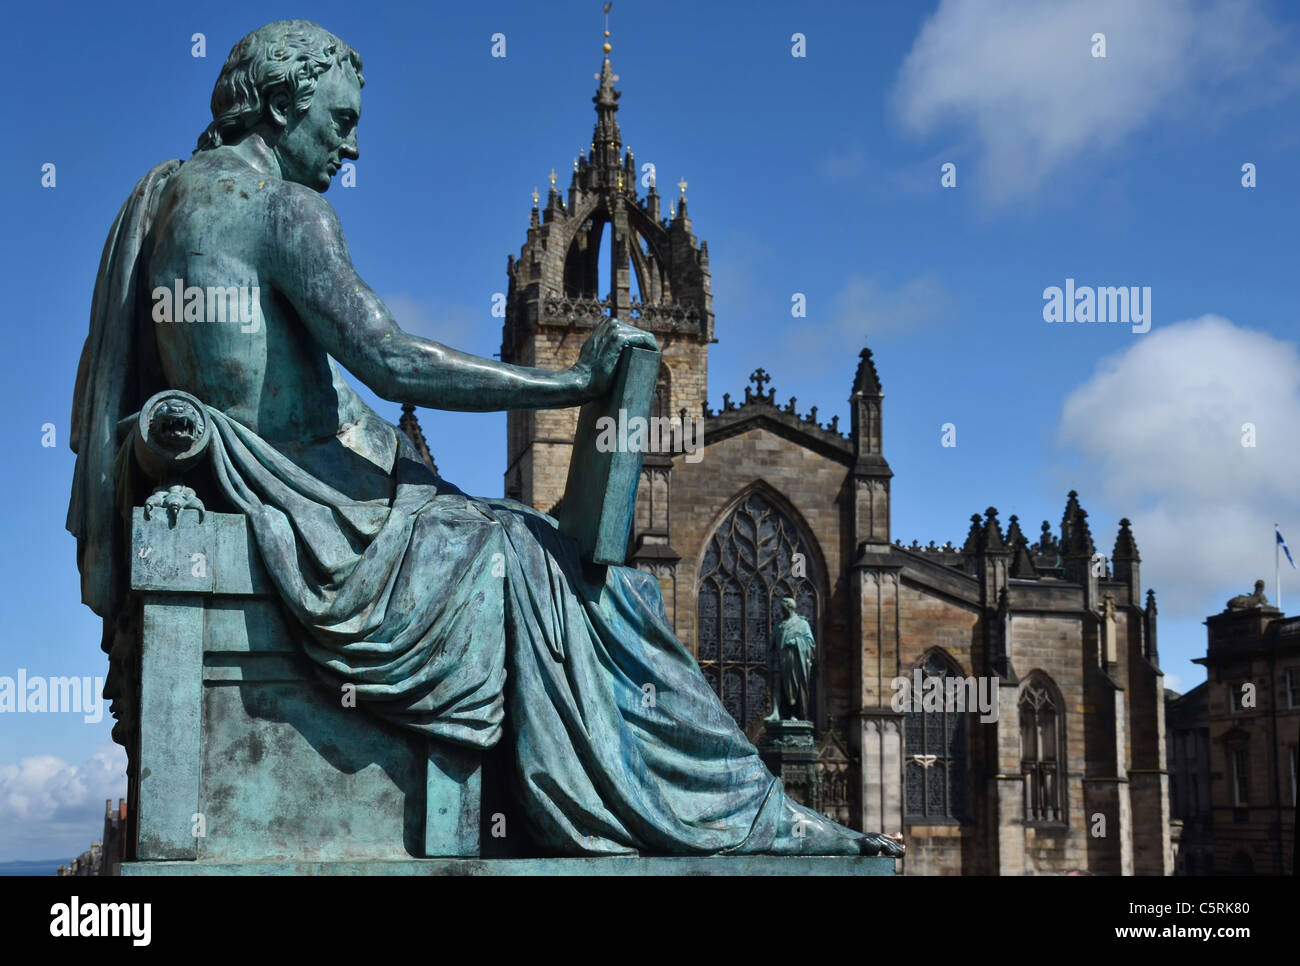 The statue of David Hume by sculptor Alexander Stoddart  on the Royal Mile in Edinburgh with St Giles Cathedral in the background. Stock Photo